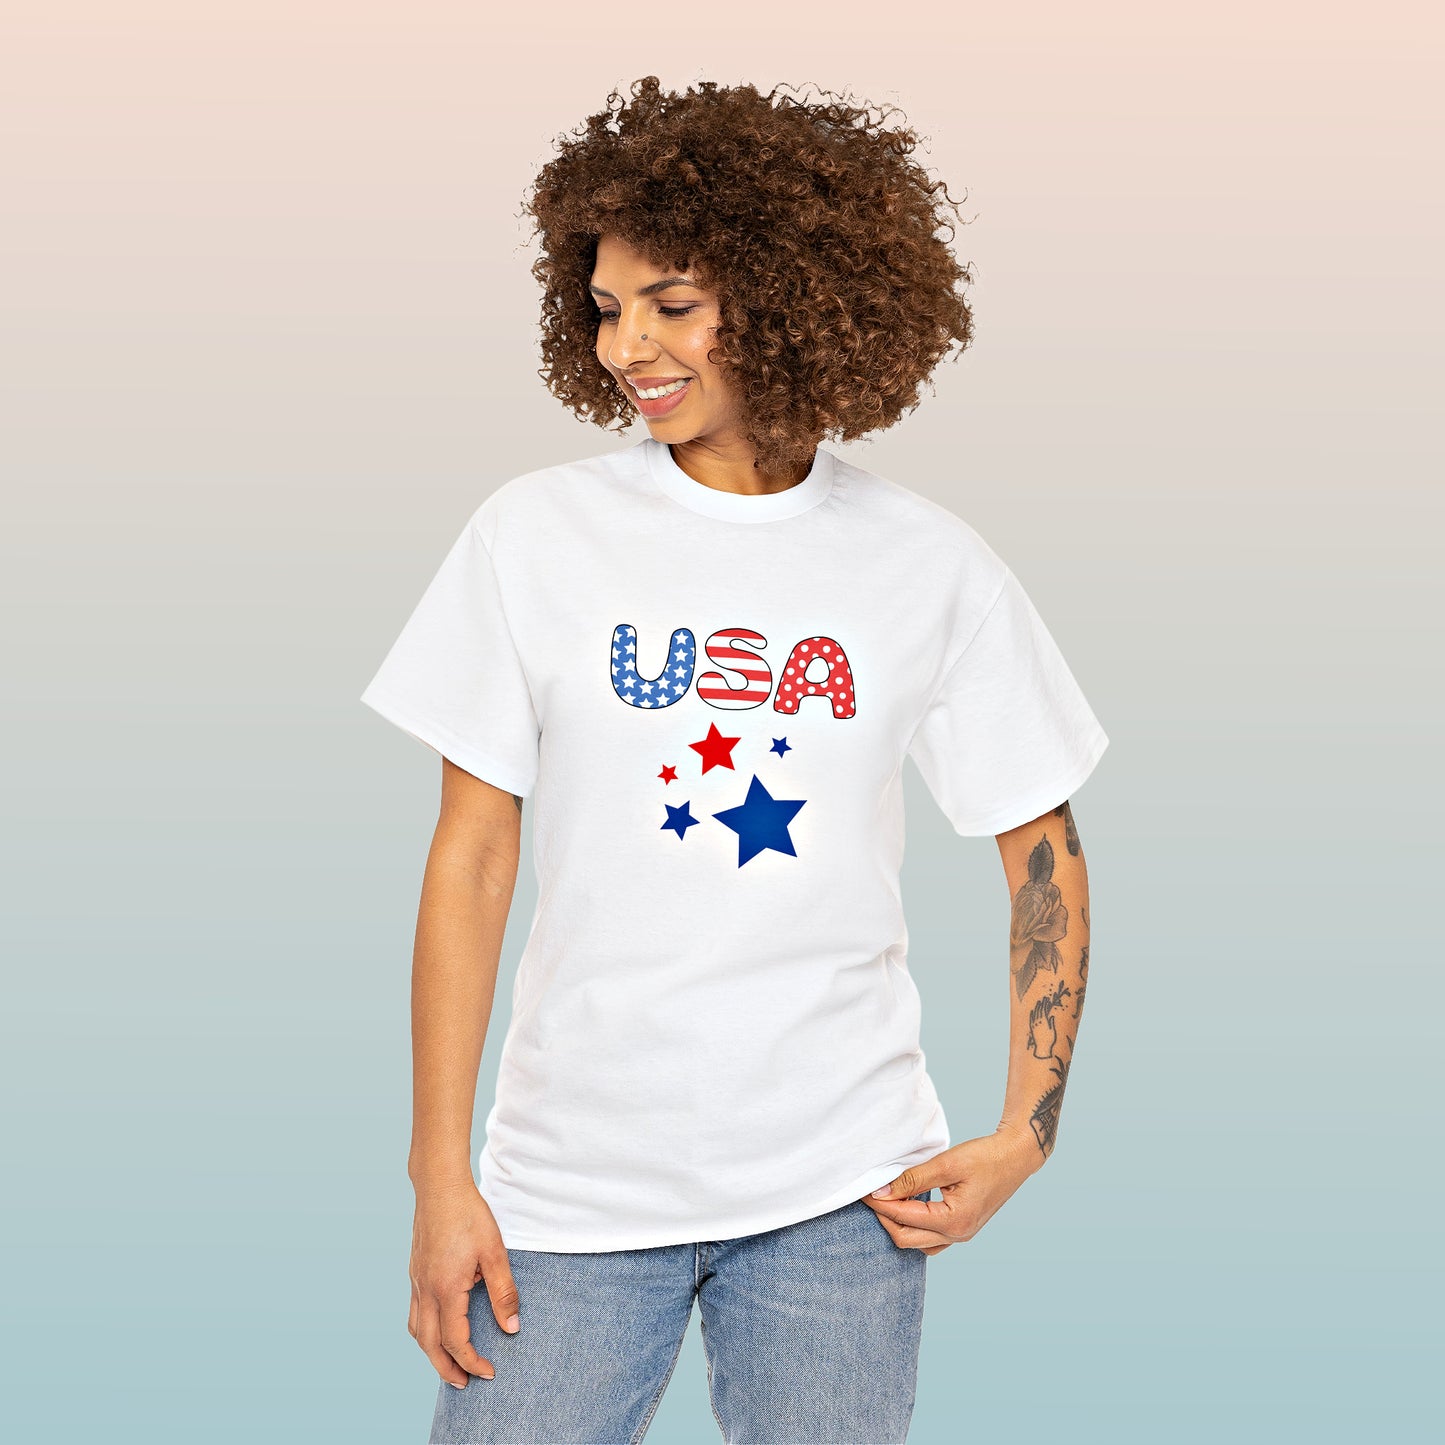 Mock up of a dark haired, slim woman, wearing the White t-shirt